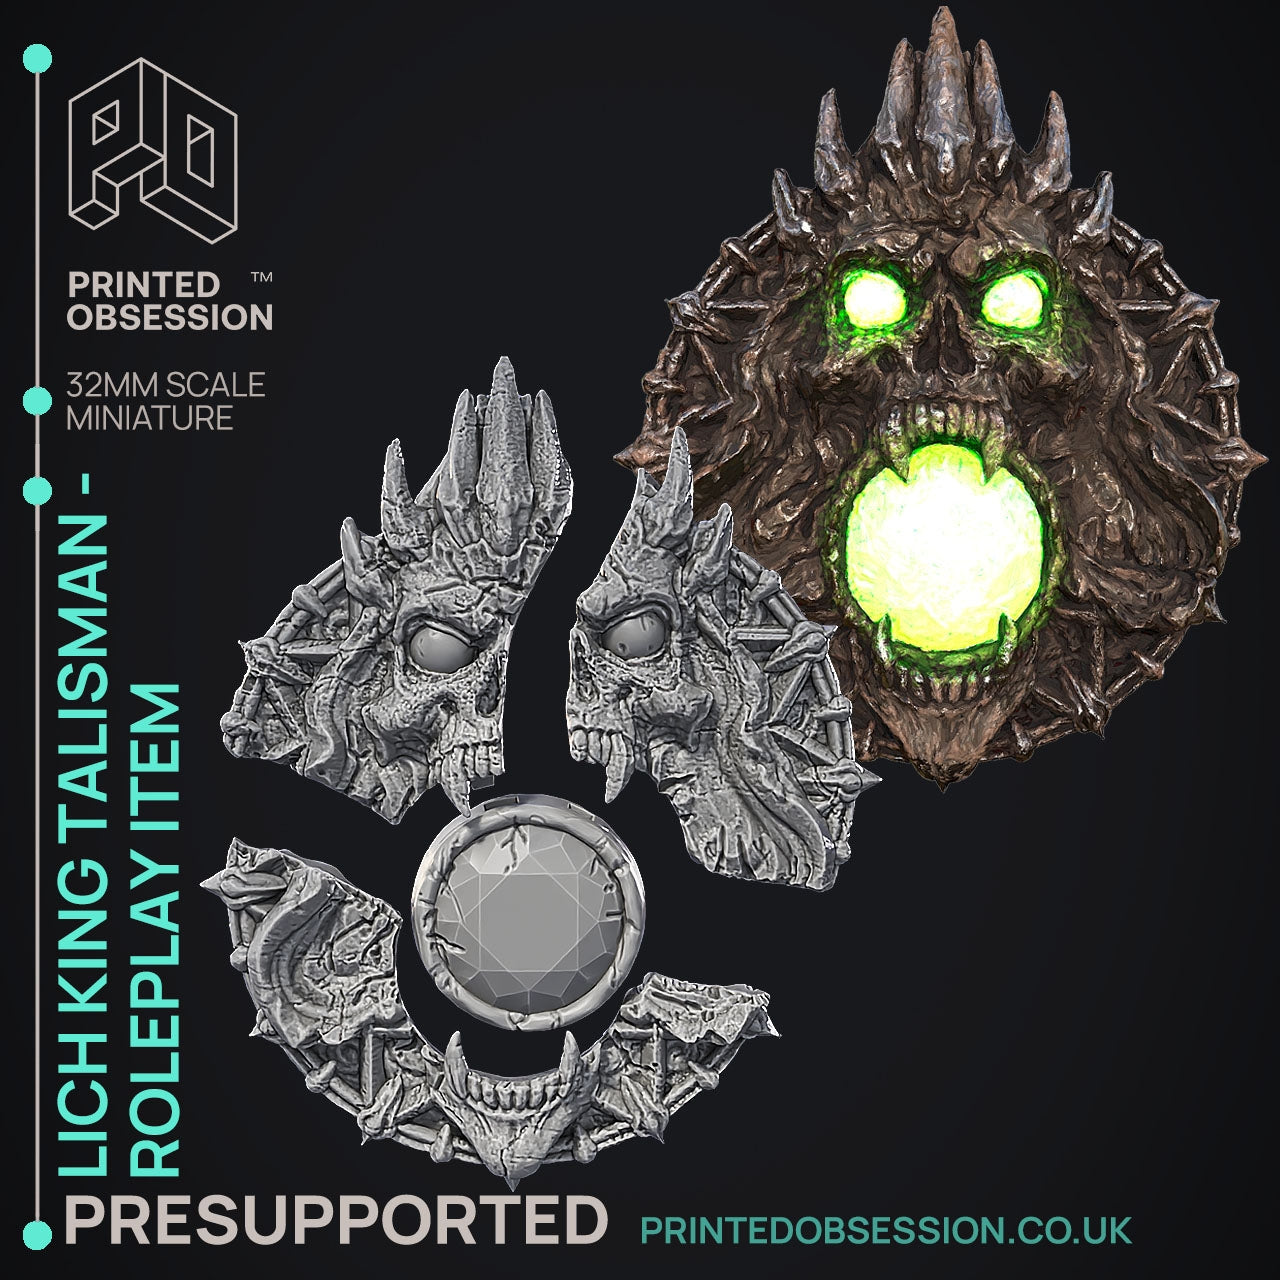 Prop Sets - The Talisman Seller series (role play props and more) The Printed Obsession - Table-top mini, 3D Printed Collectable for painting and playing!